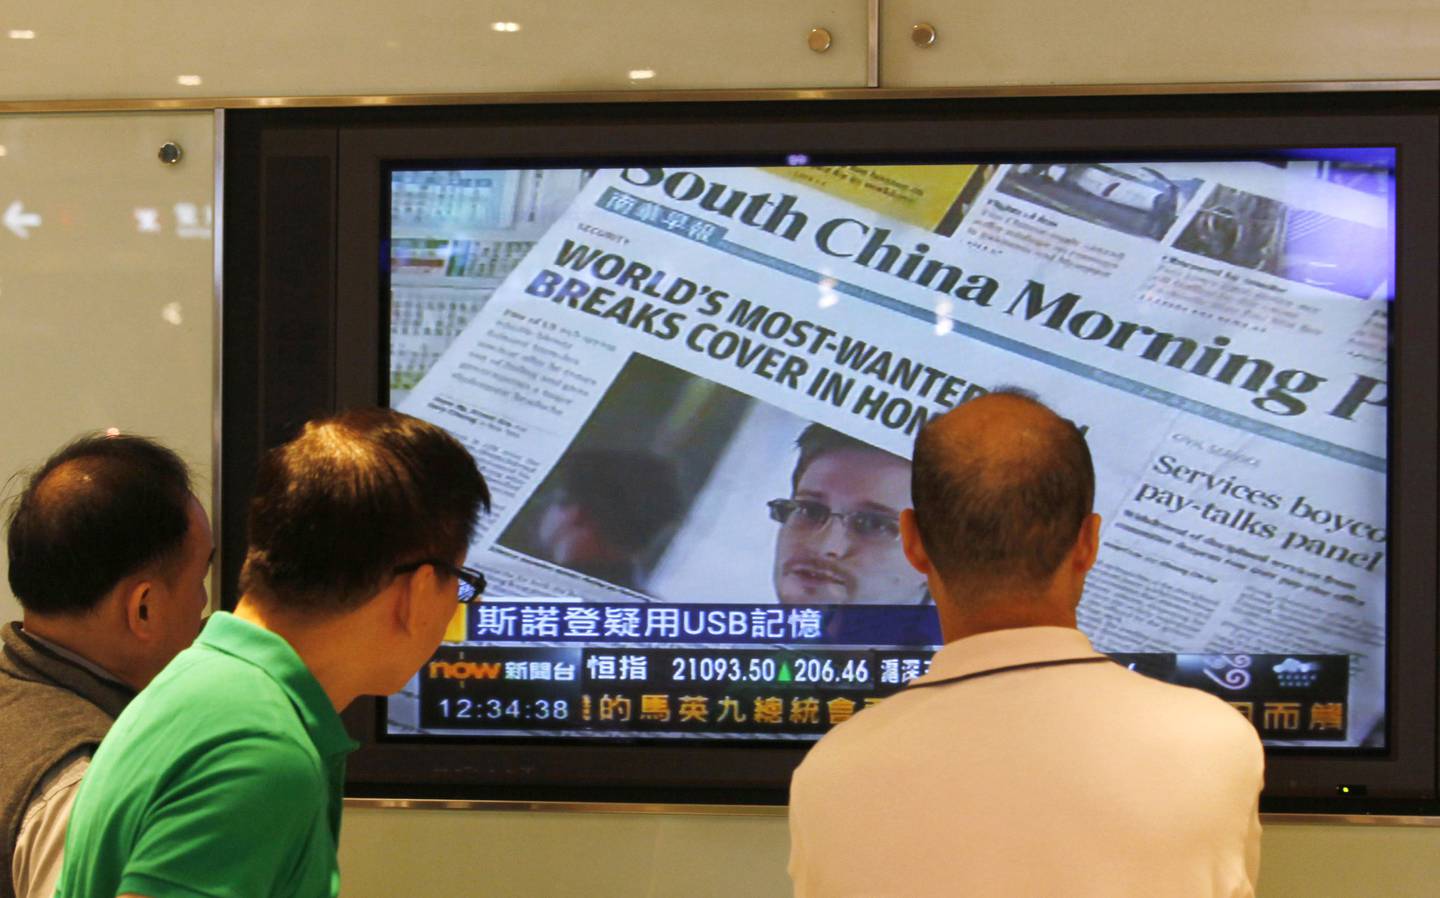 A TV screen shows the news report of Edward Snowden, former CIA employee who leaked top-secret documents about sweeping U.S. surveillance programs, at a shopping mall in Hong Kong Friday, June 14, 2013. A popular Communist Party-backed newspaper urged China's leadership to milk a former U.S. contractor for more information rather than send him home, saying his revelations about secret American surveillance programs concern China's national interest.(AP Photo/Kin Cheung)